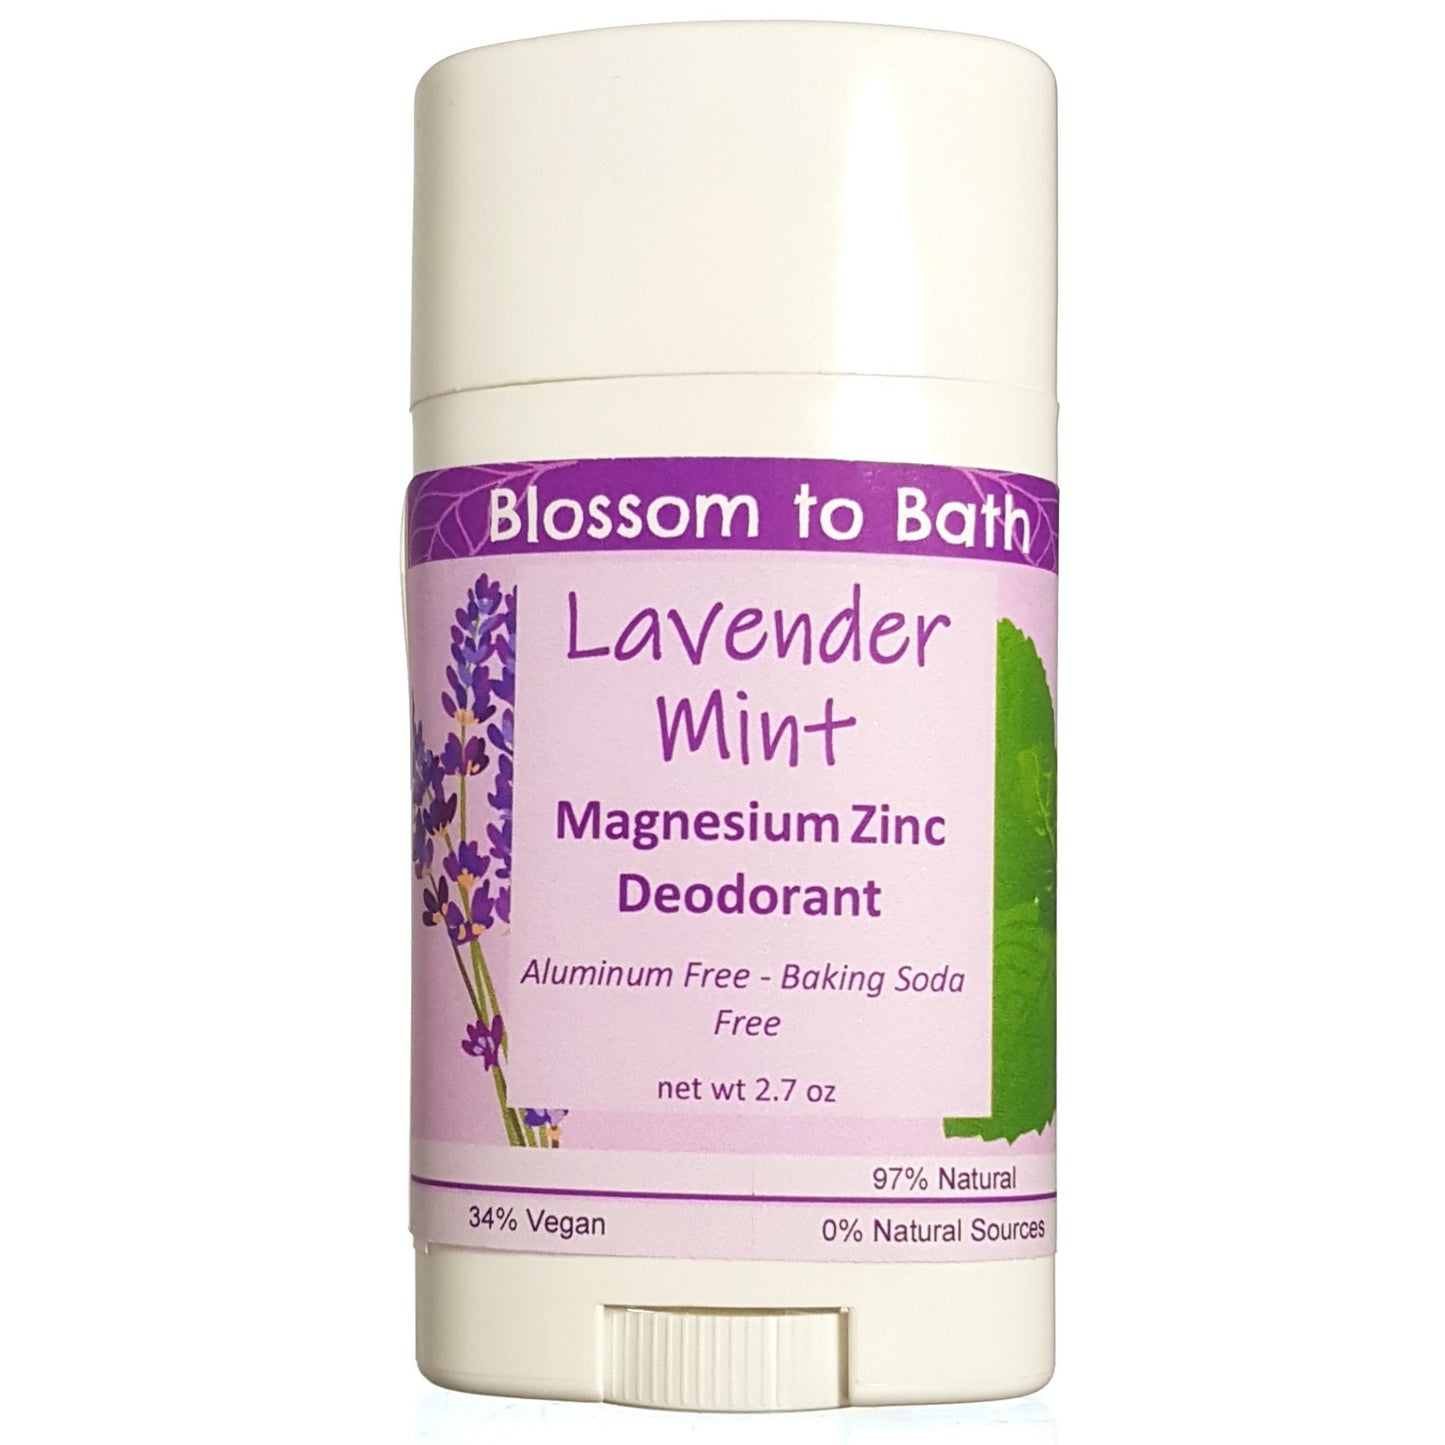 Buy Blossom to Bath Lavender Mint Magnesium Zinc Deodorant from Flowersong Soap Studio.  Long lasting protection made from organic botanicals and butters, made without baking soda, tested in the Arizona heat  A cheerfully relaxing combination of lavender and peppermint.